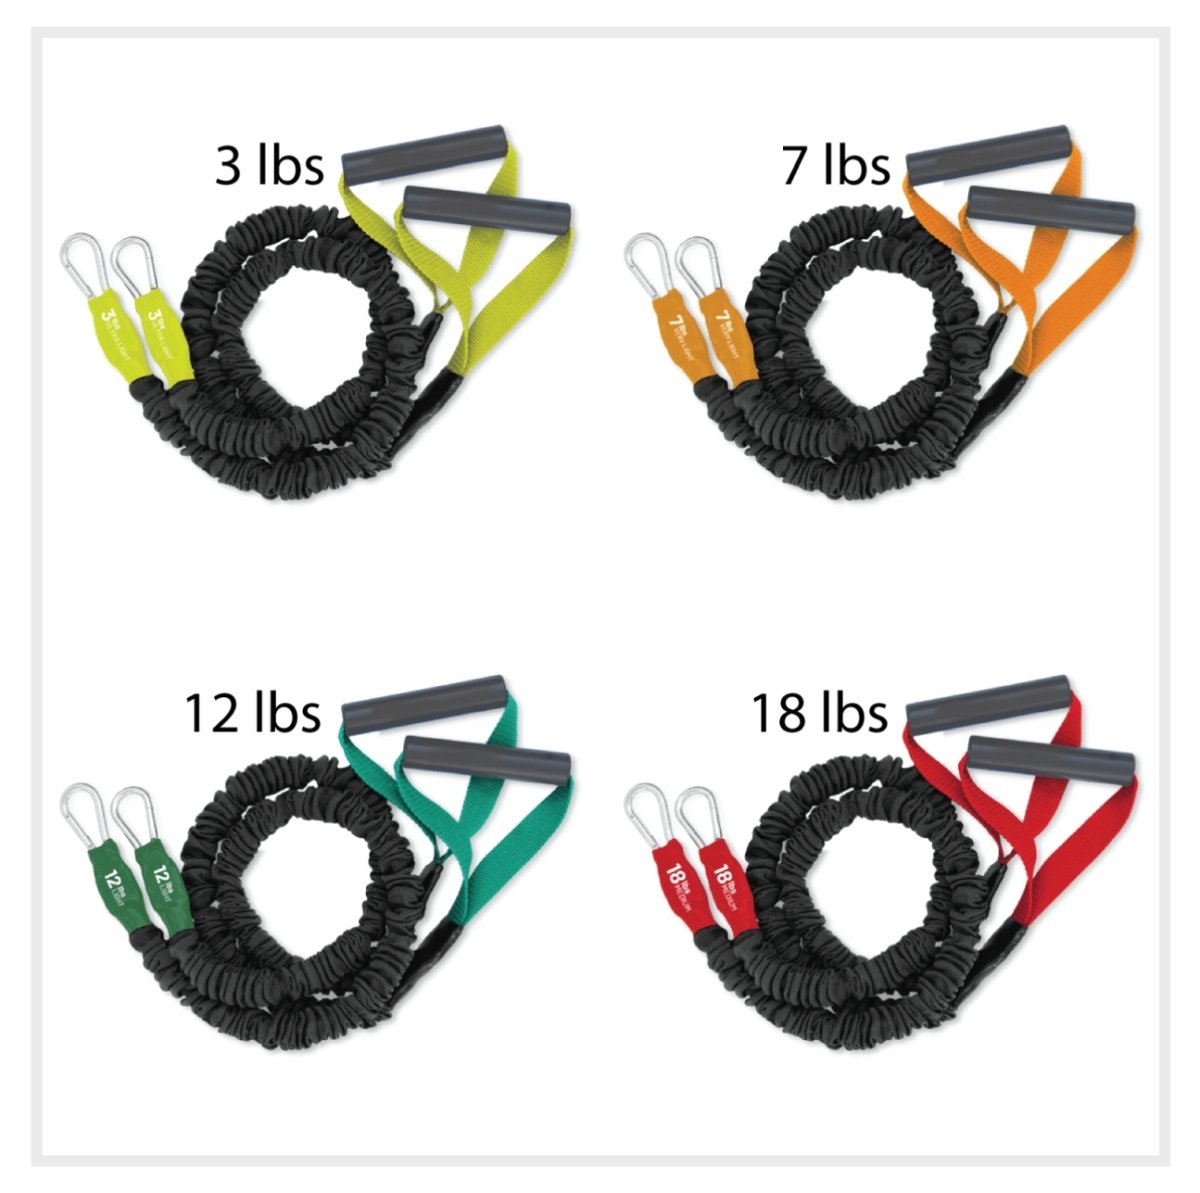 X-Over Shoulder and Arm Resistance Bands- 4 Pack (3lb/7lb/12lb/18lb) - FitCord Resistance Bands American made resistance tube cords for upper body shoulder and arms